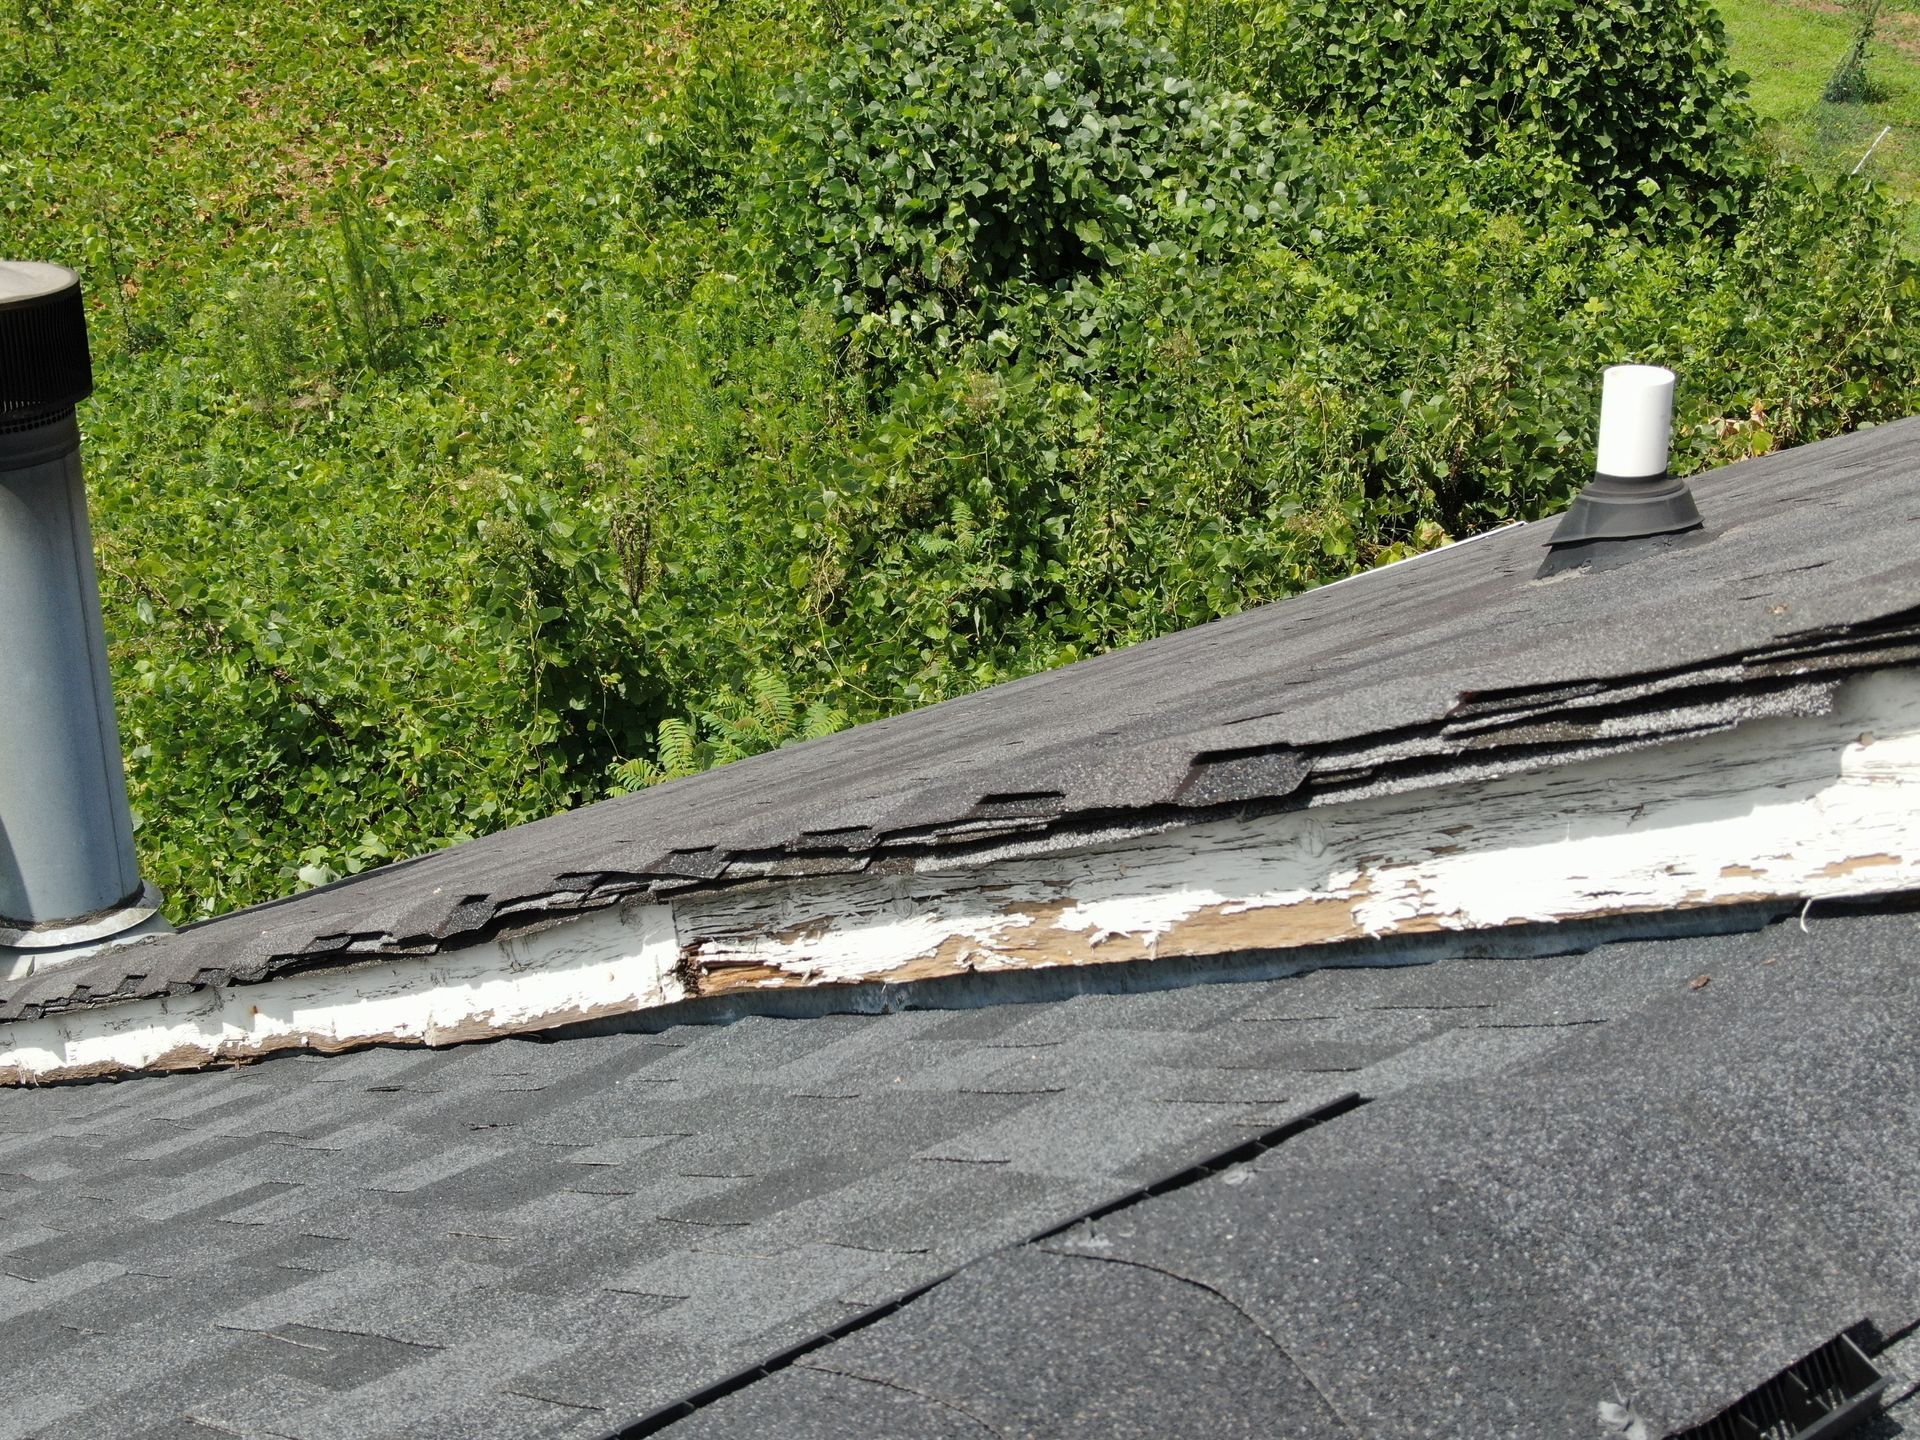 Don't get caught in the deductible trap: This image shows the potential consequences of unethical roofing practices.